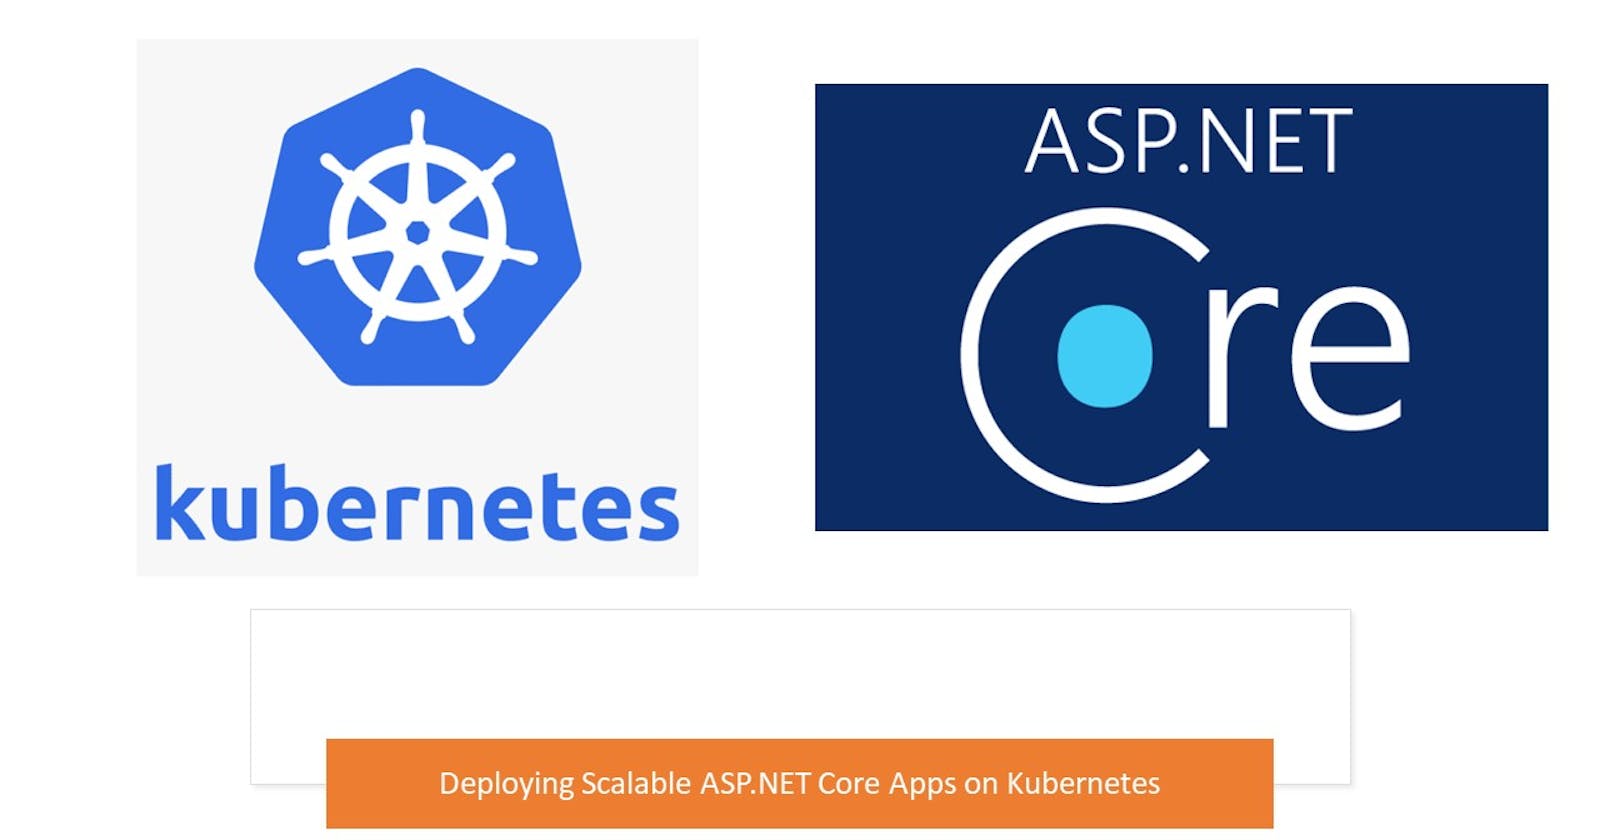 Deploying Scalable ASP.NET Core Apps on Kubernetes